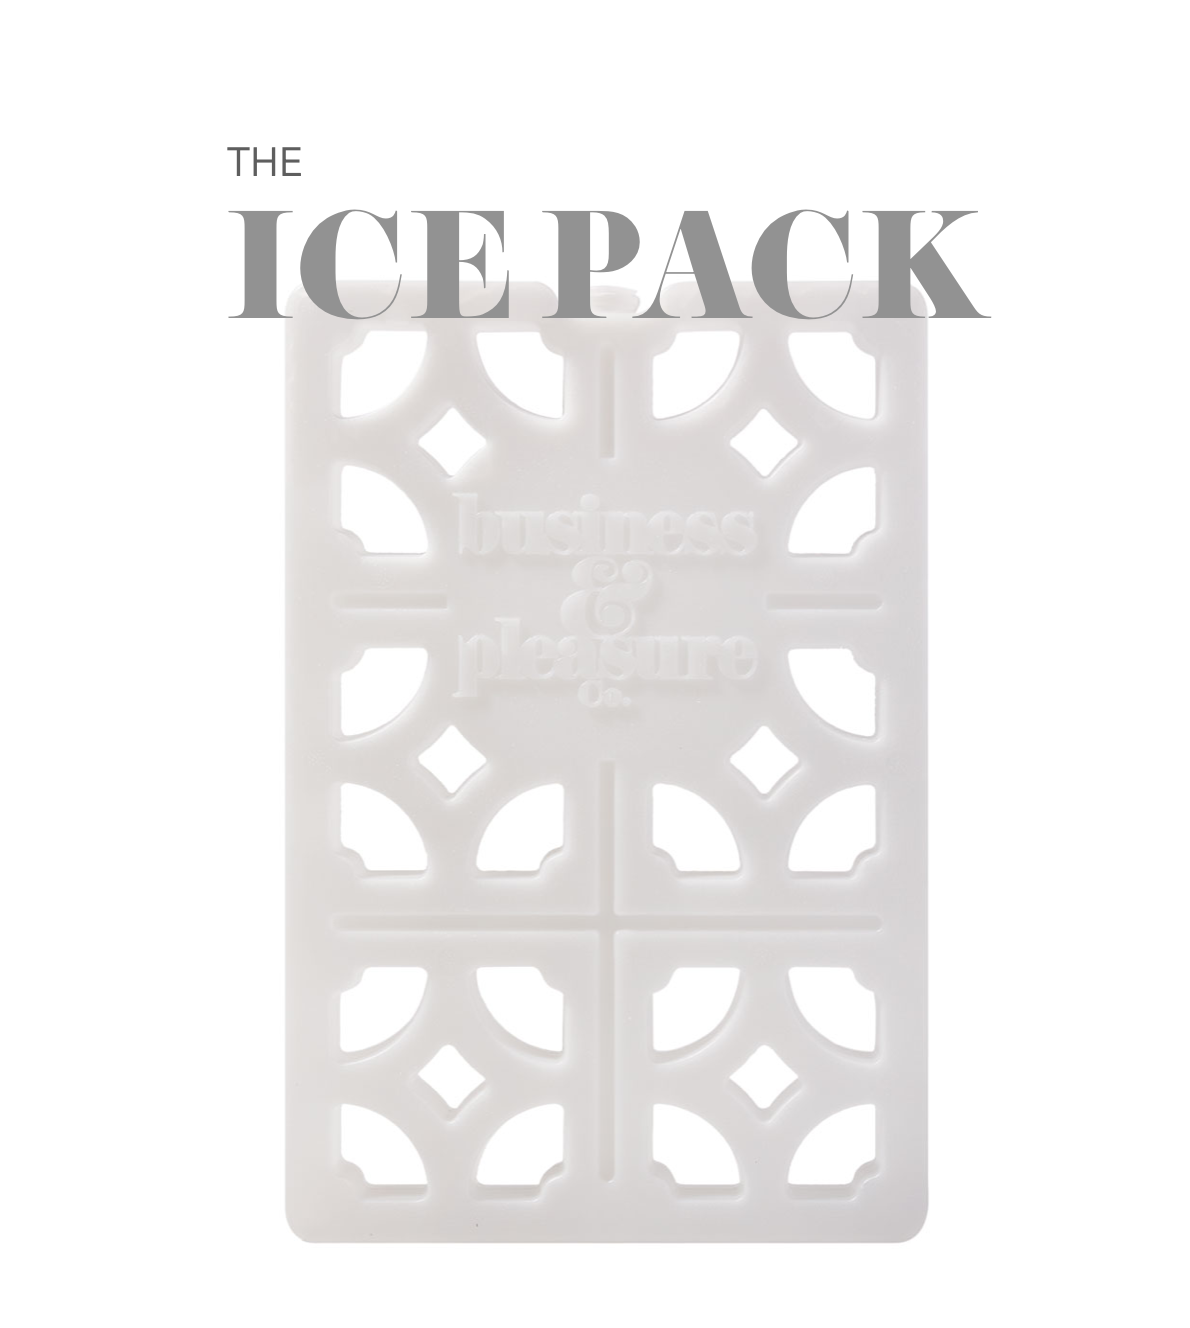 Video of ice pack